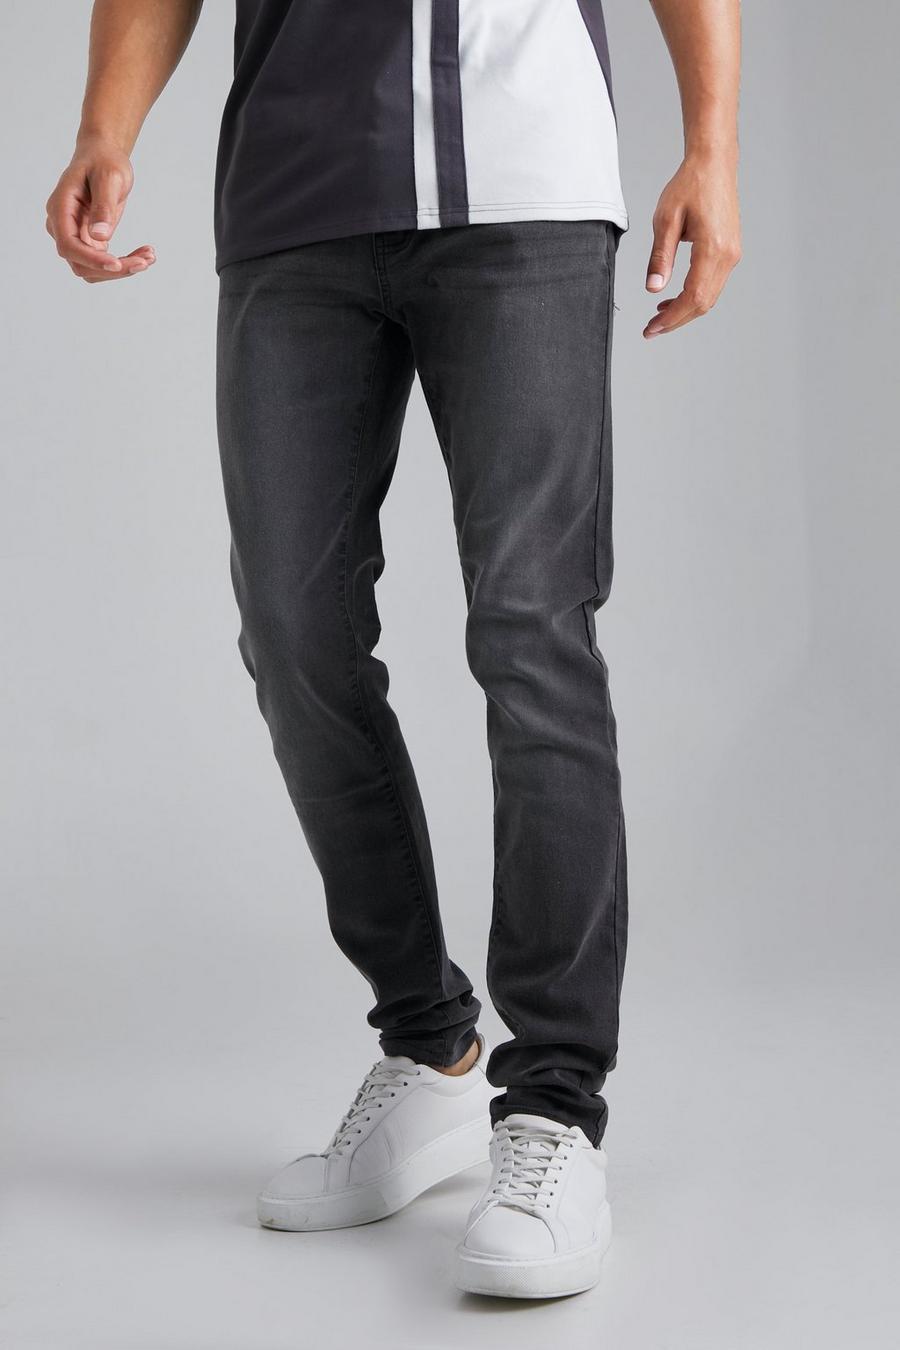 Charcoal gris Tall Stretch Skinny Fit Jeans image number 1